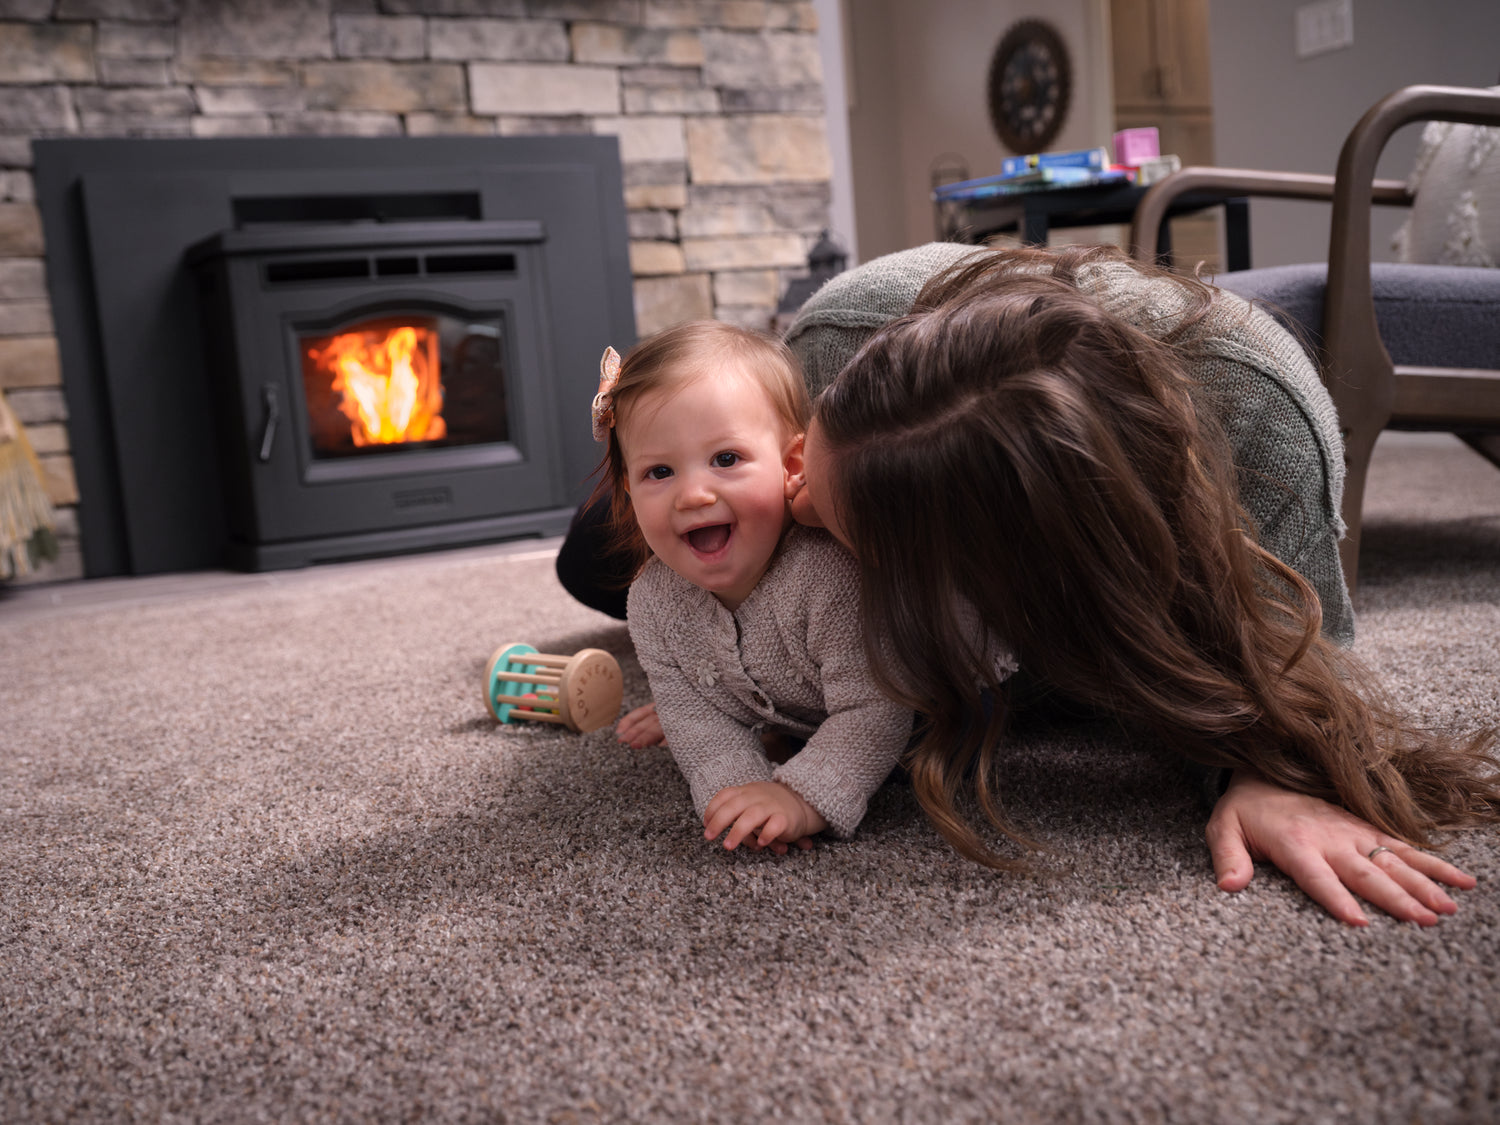 A mother playing with her baby on the floor in front of a fireplace